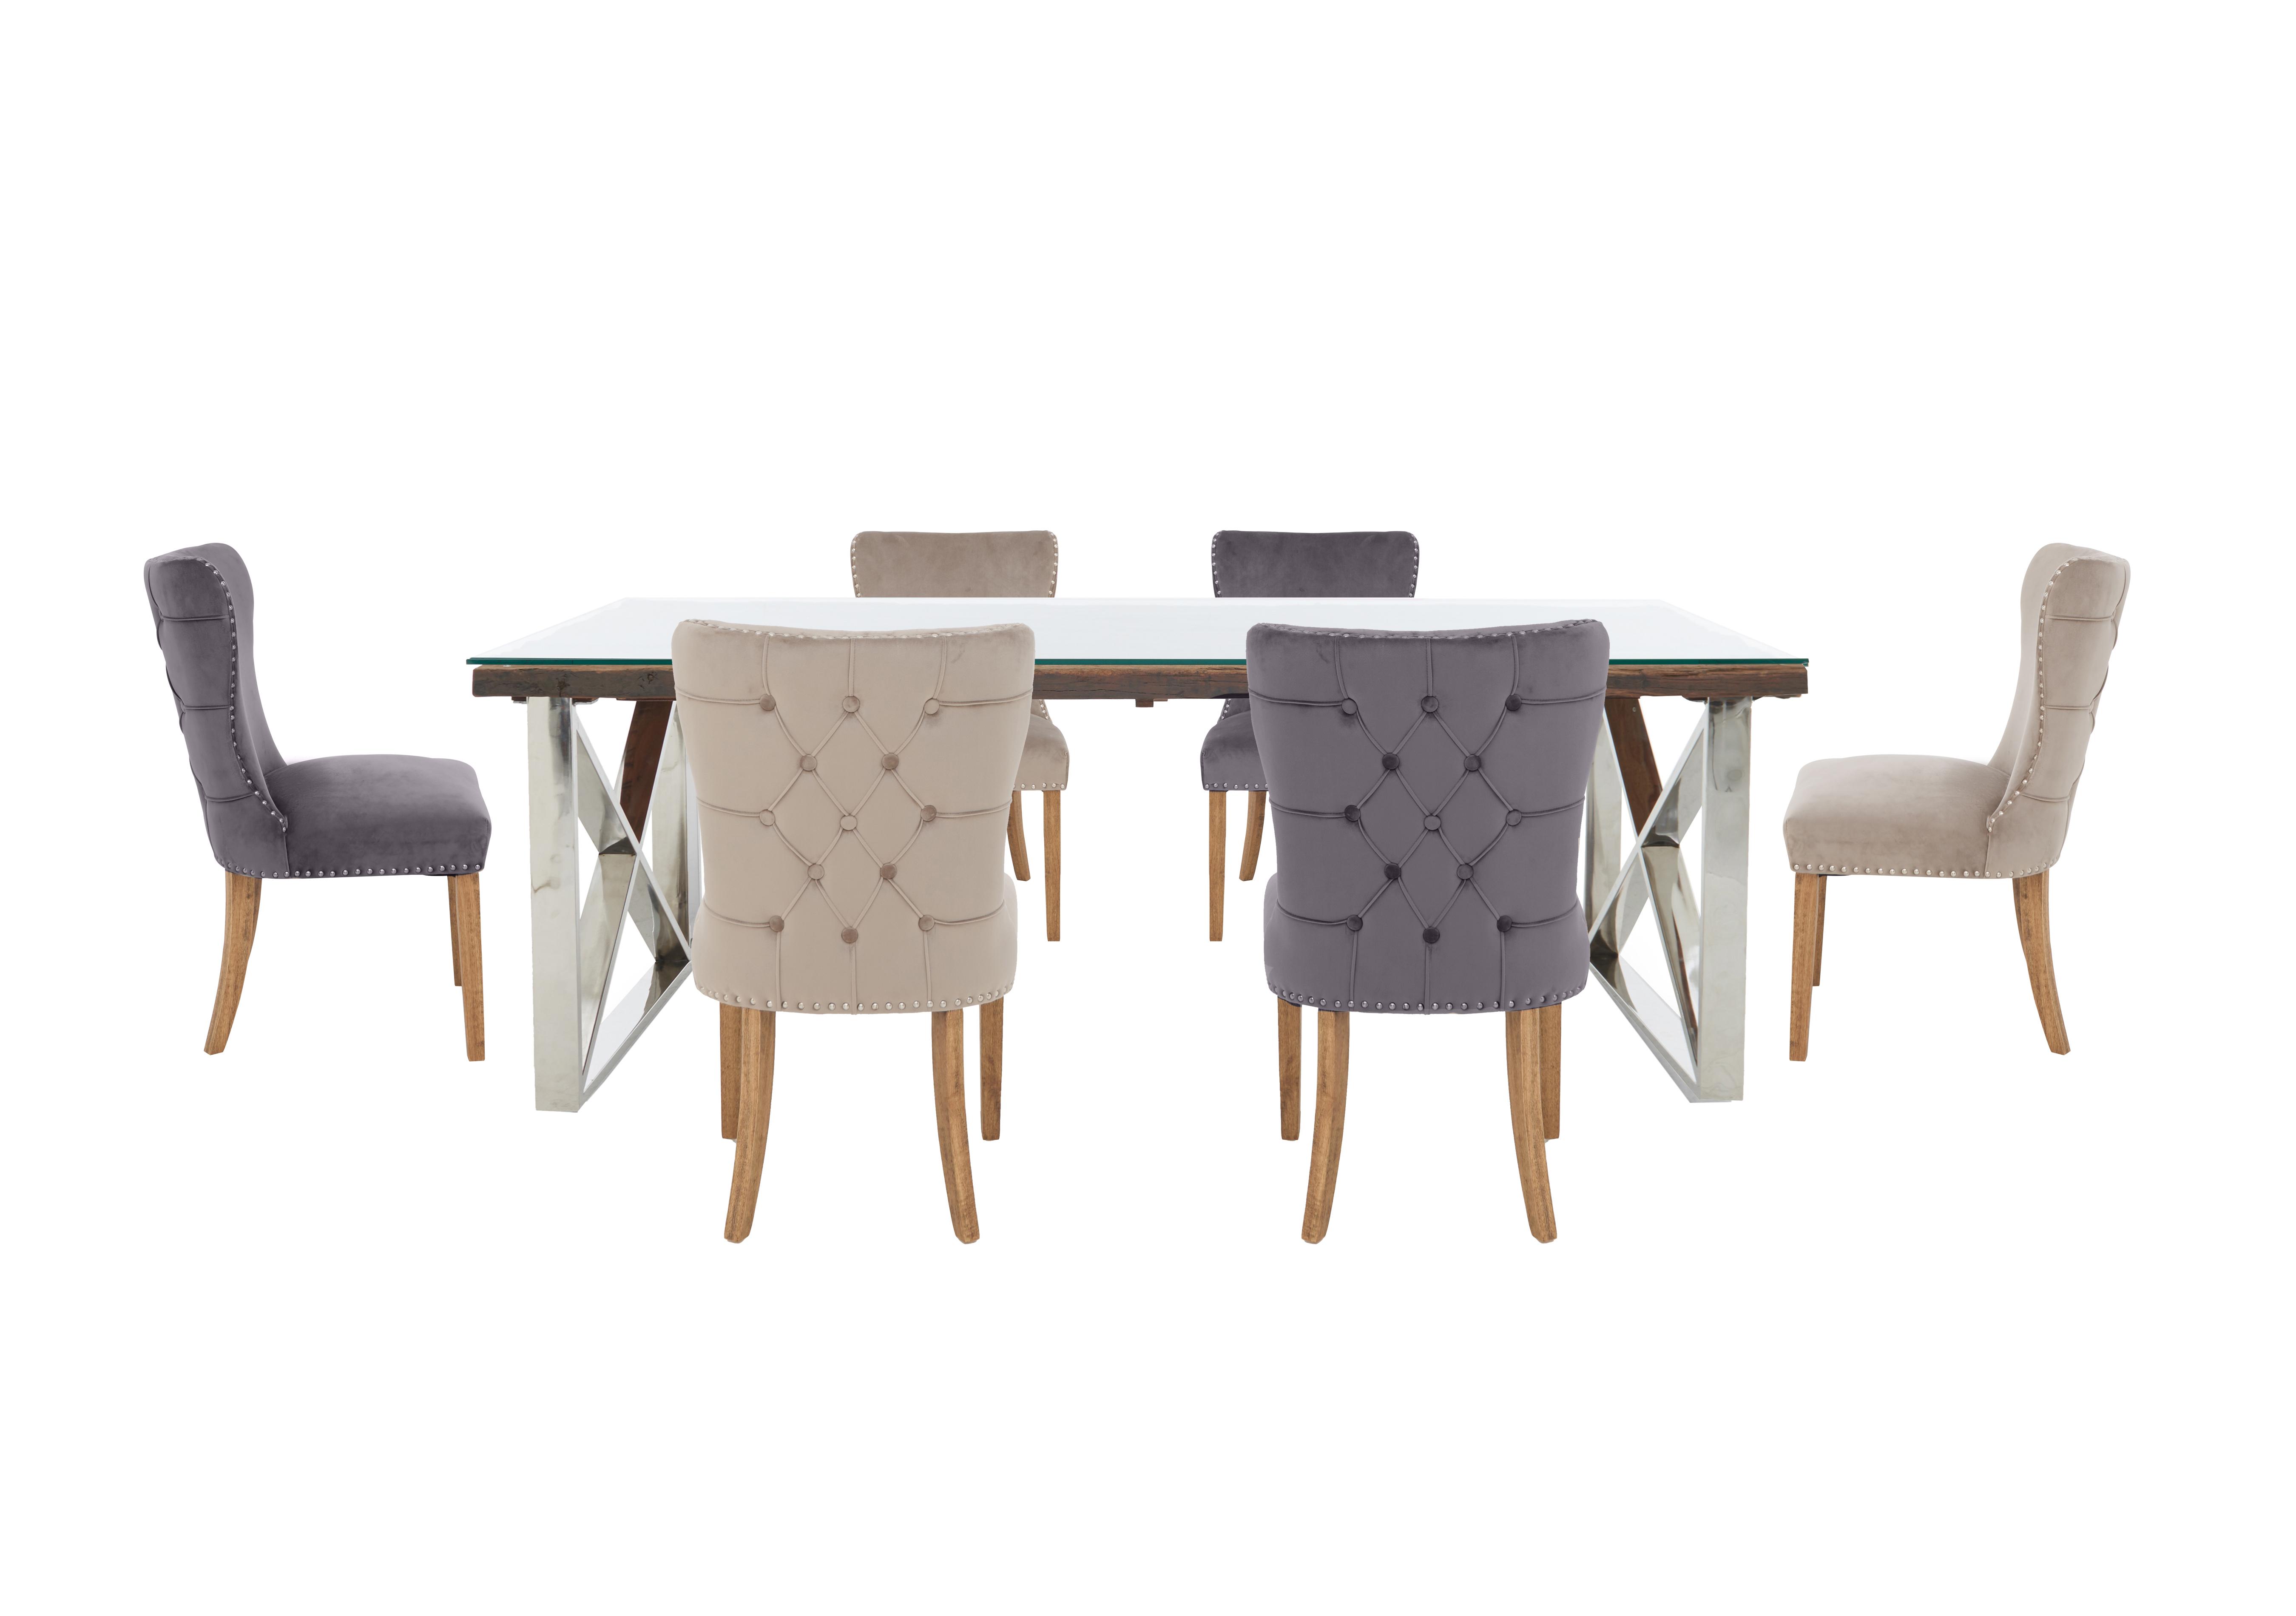 Chennai Dining Table with X-Leg Base and 6 Luxe Dining Chairs in Grey / Taupe on Furniture Village